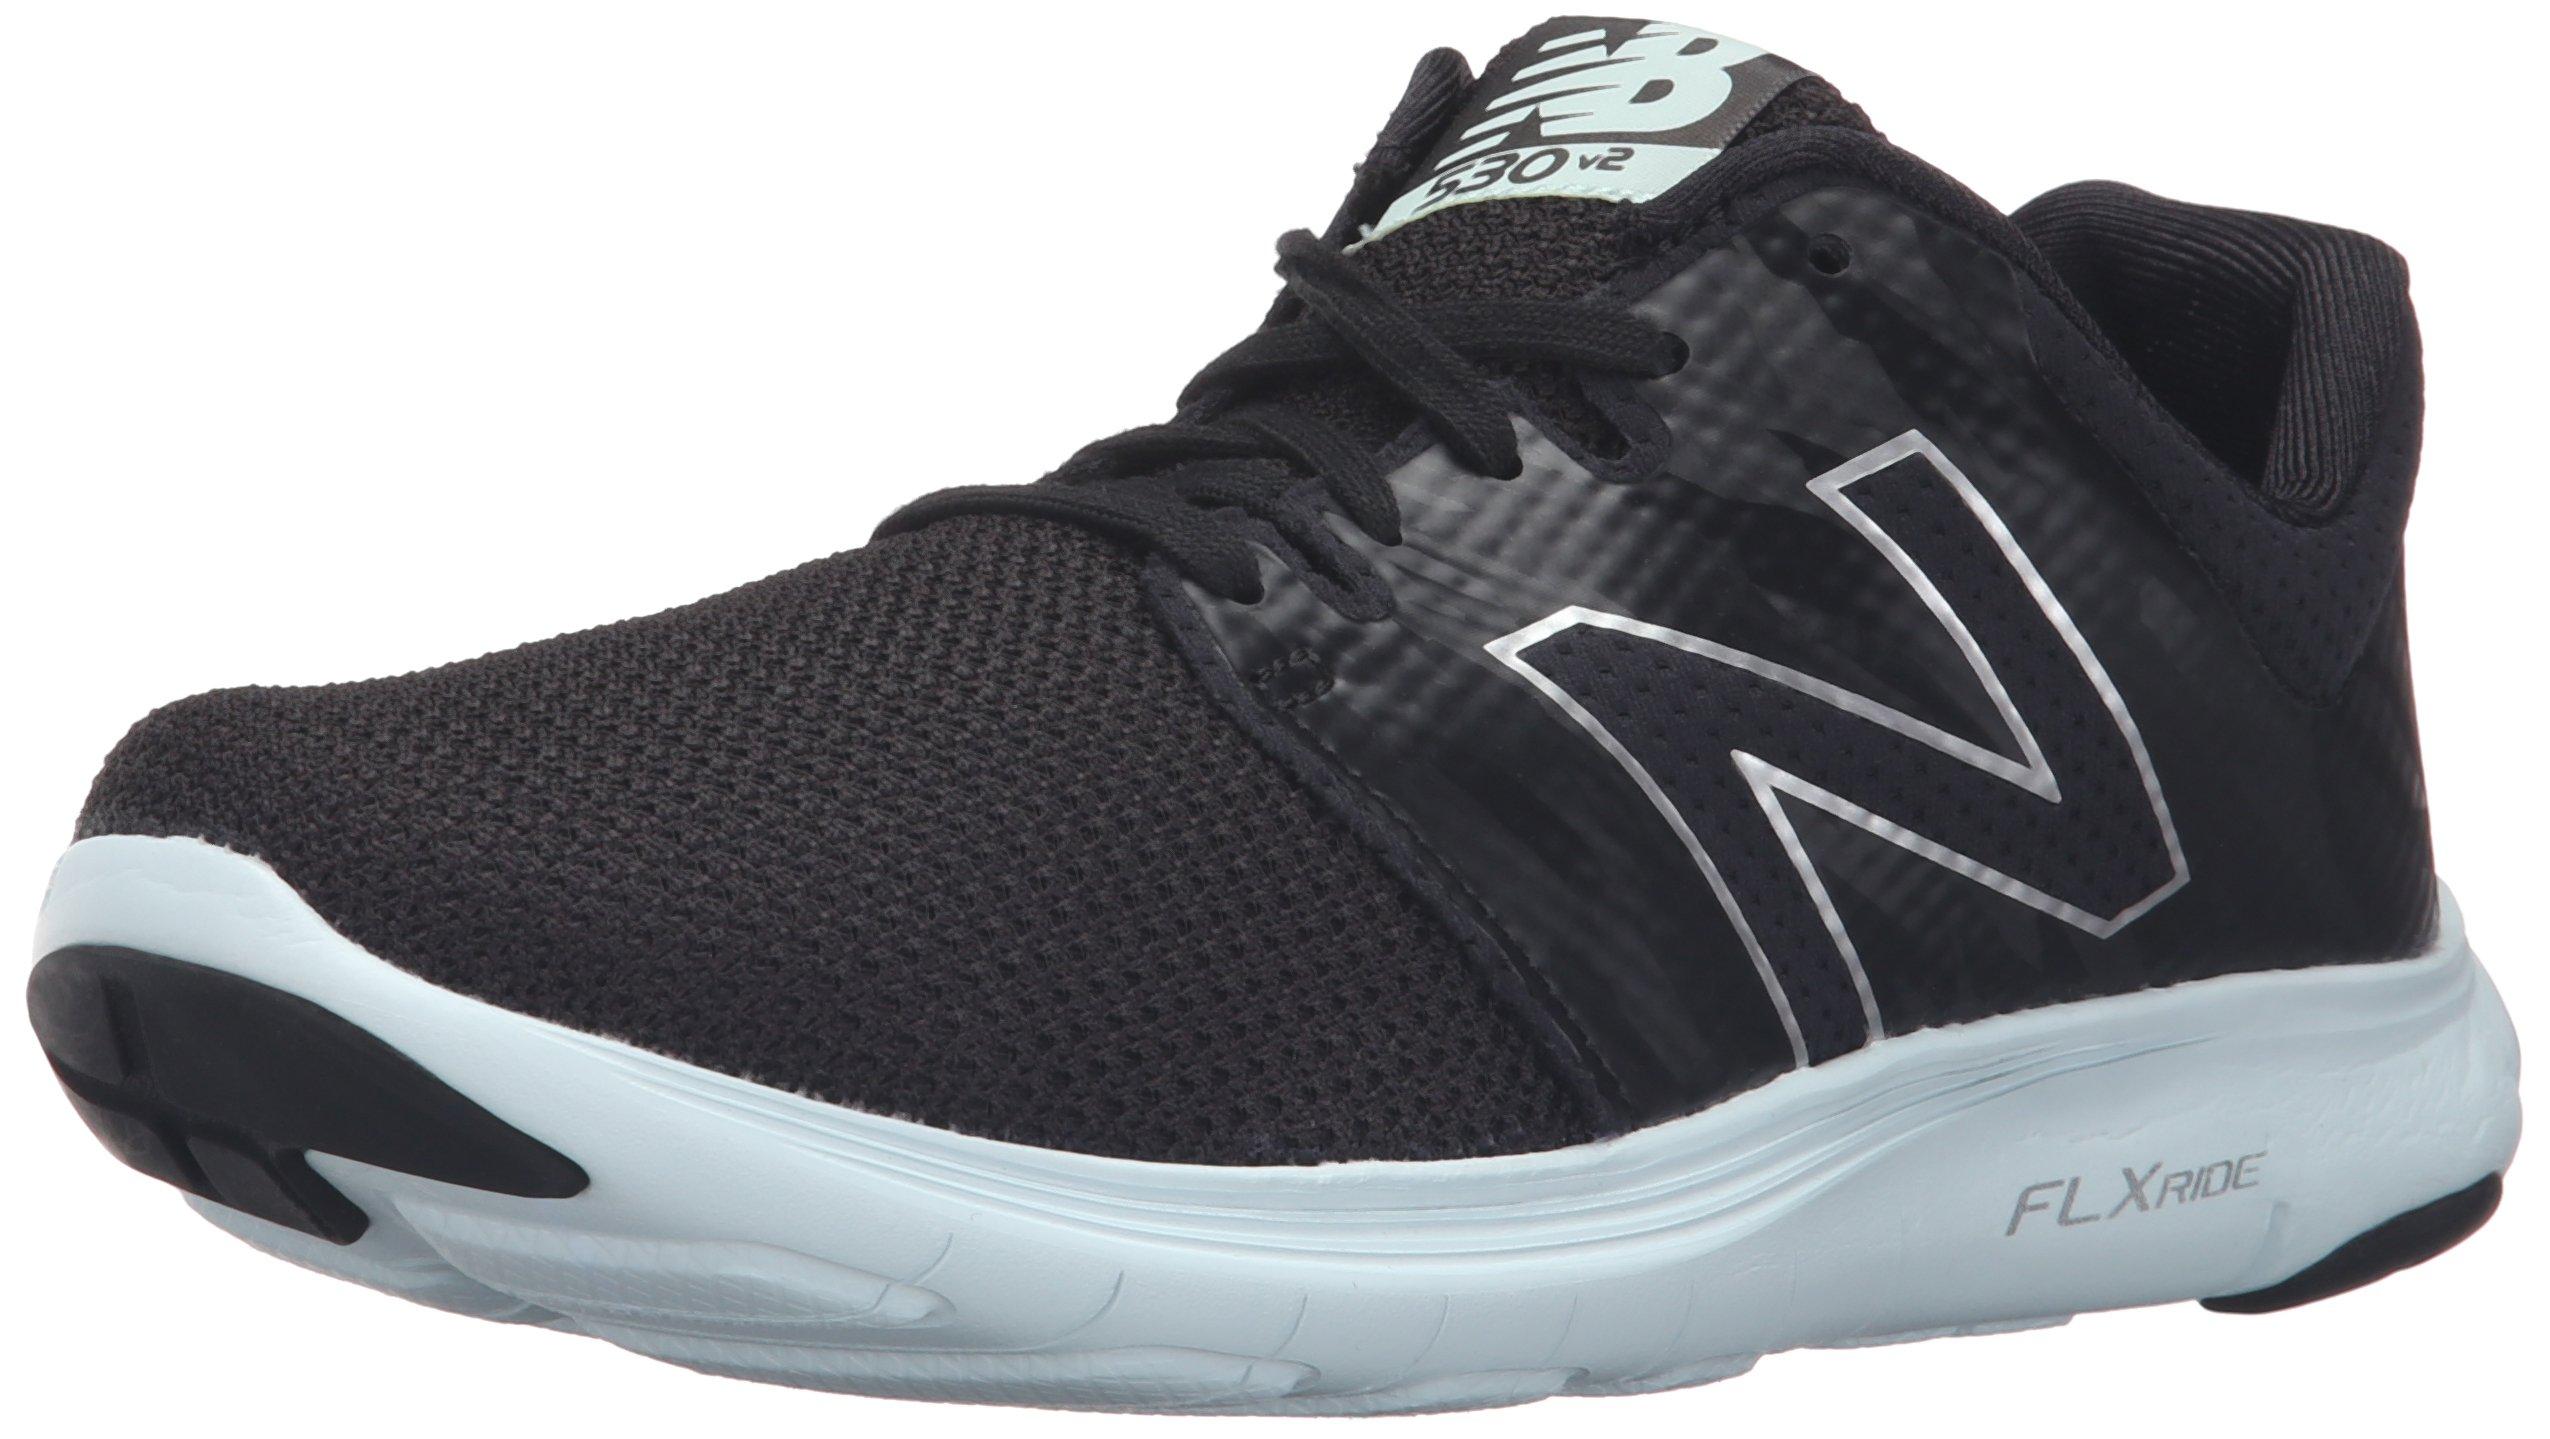 New Balance Rubber 530 V2 Running Shoe in Black - Save 59% - Lyst